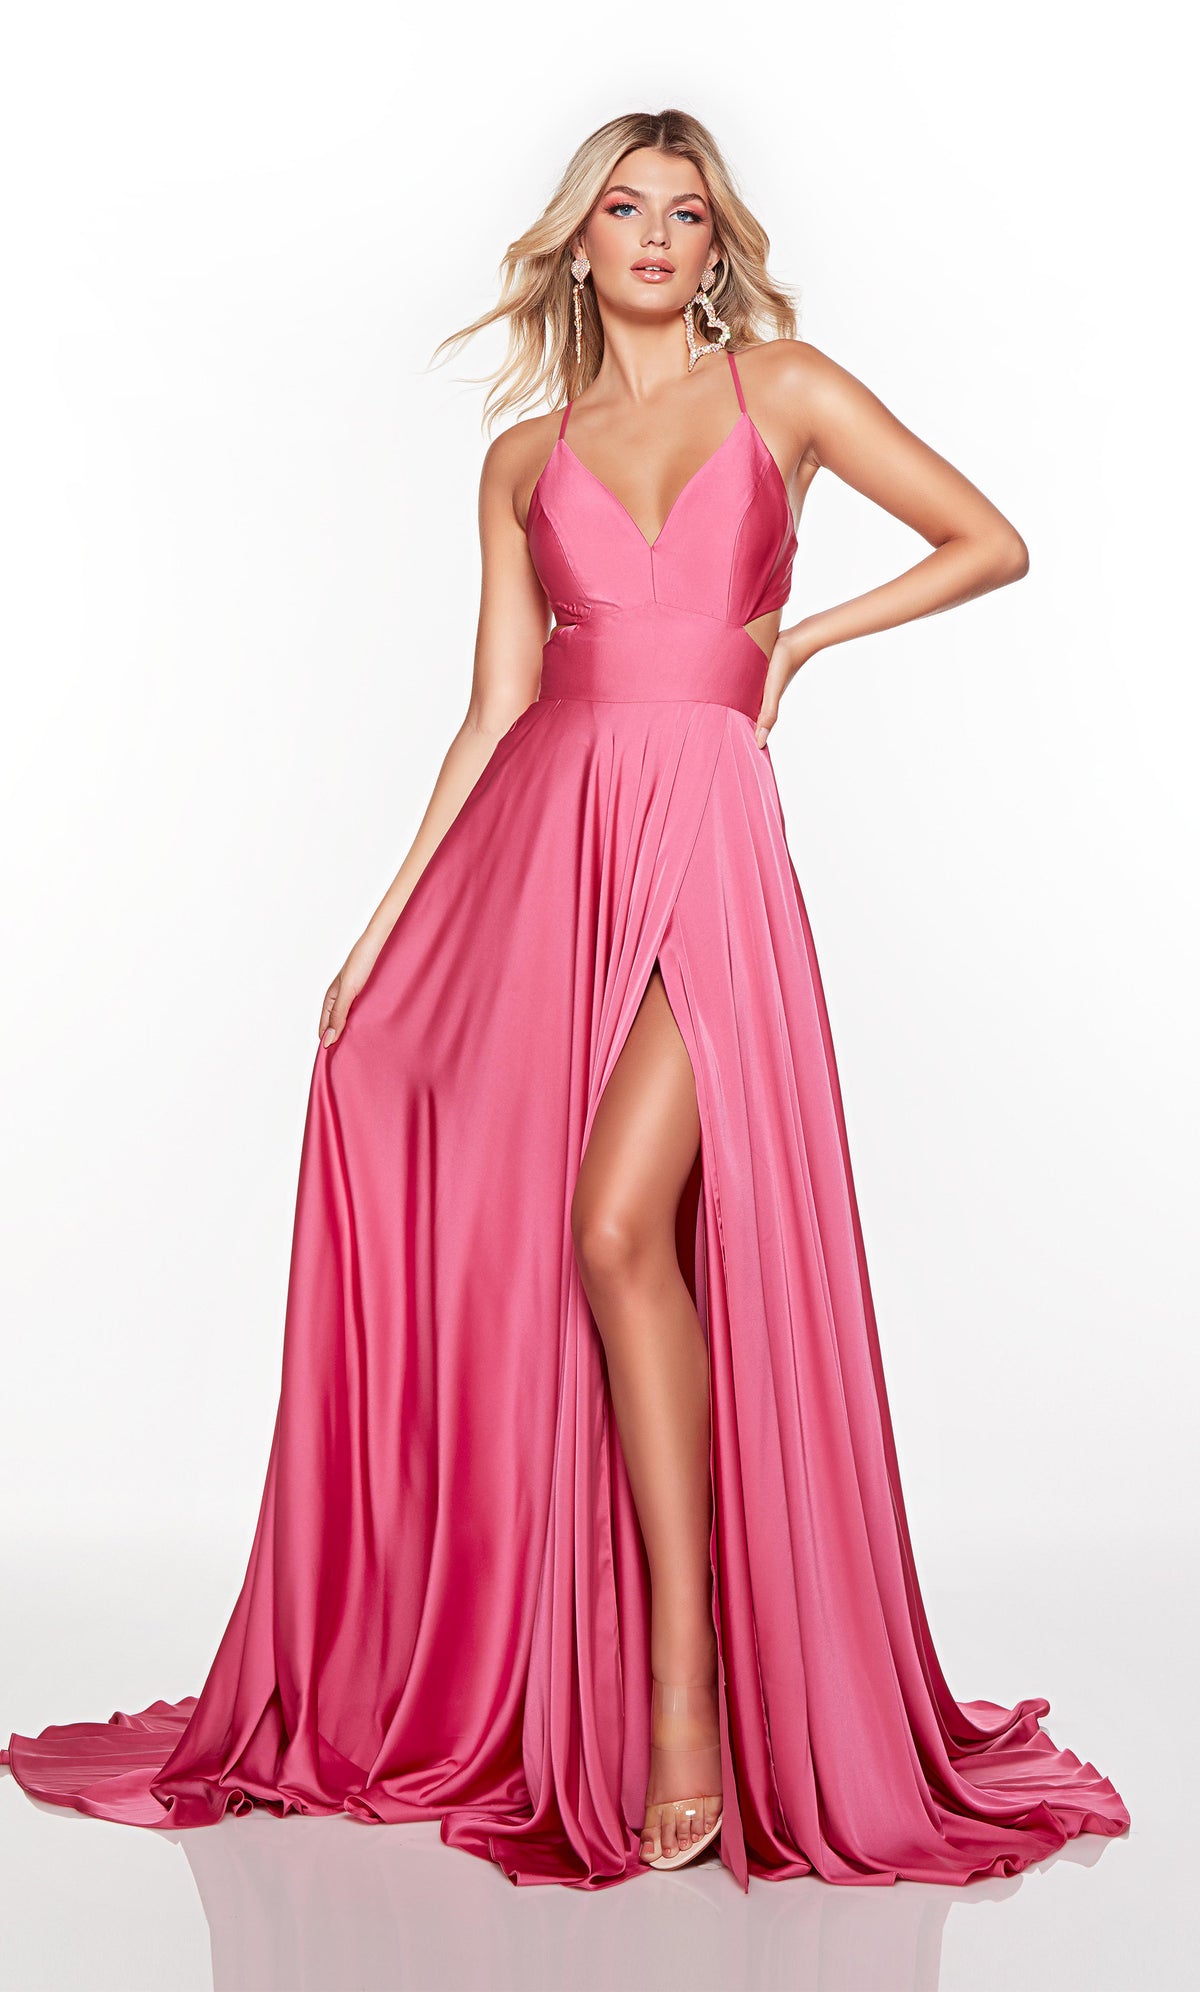 Flowy hot pink prom dress with side cutouts and front slit. COLOR-SWATCH_61460__HOT-PINK